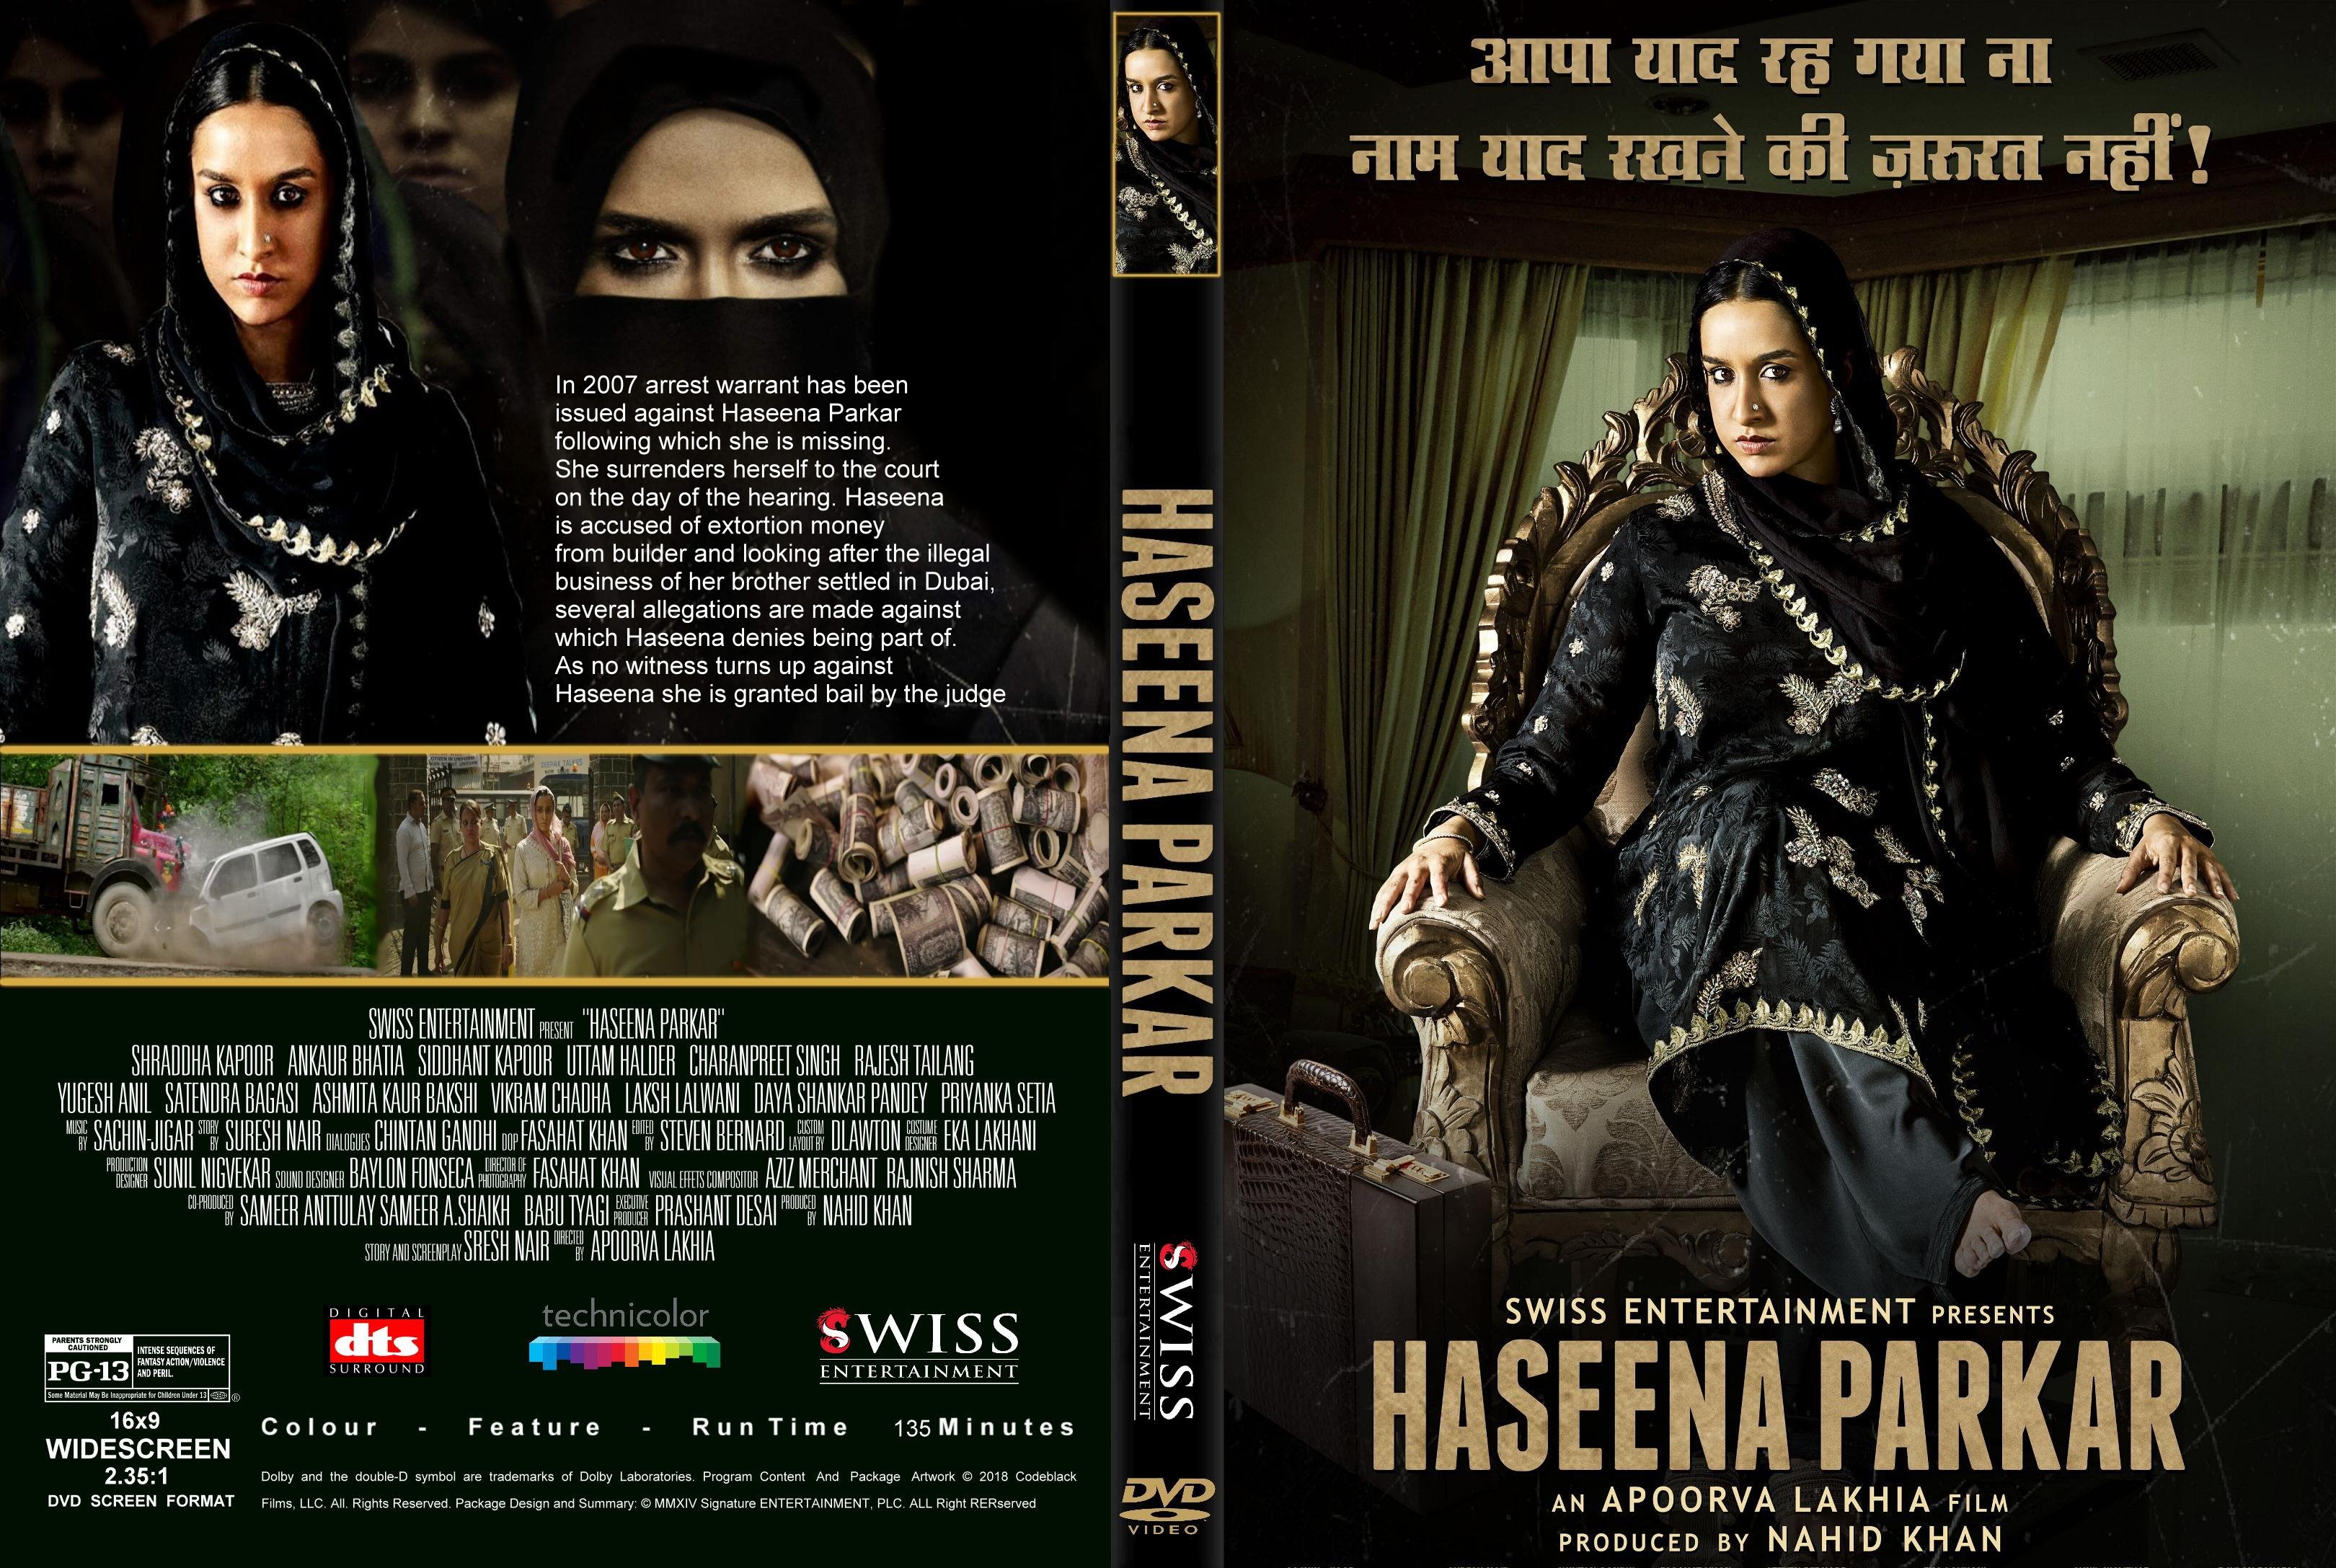 haseena parkar movie download free from torrent